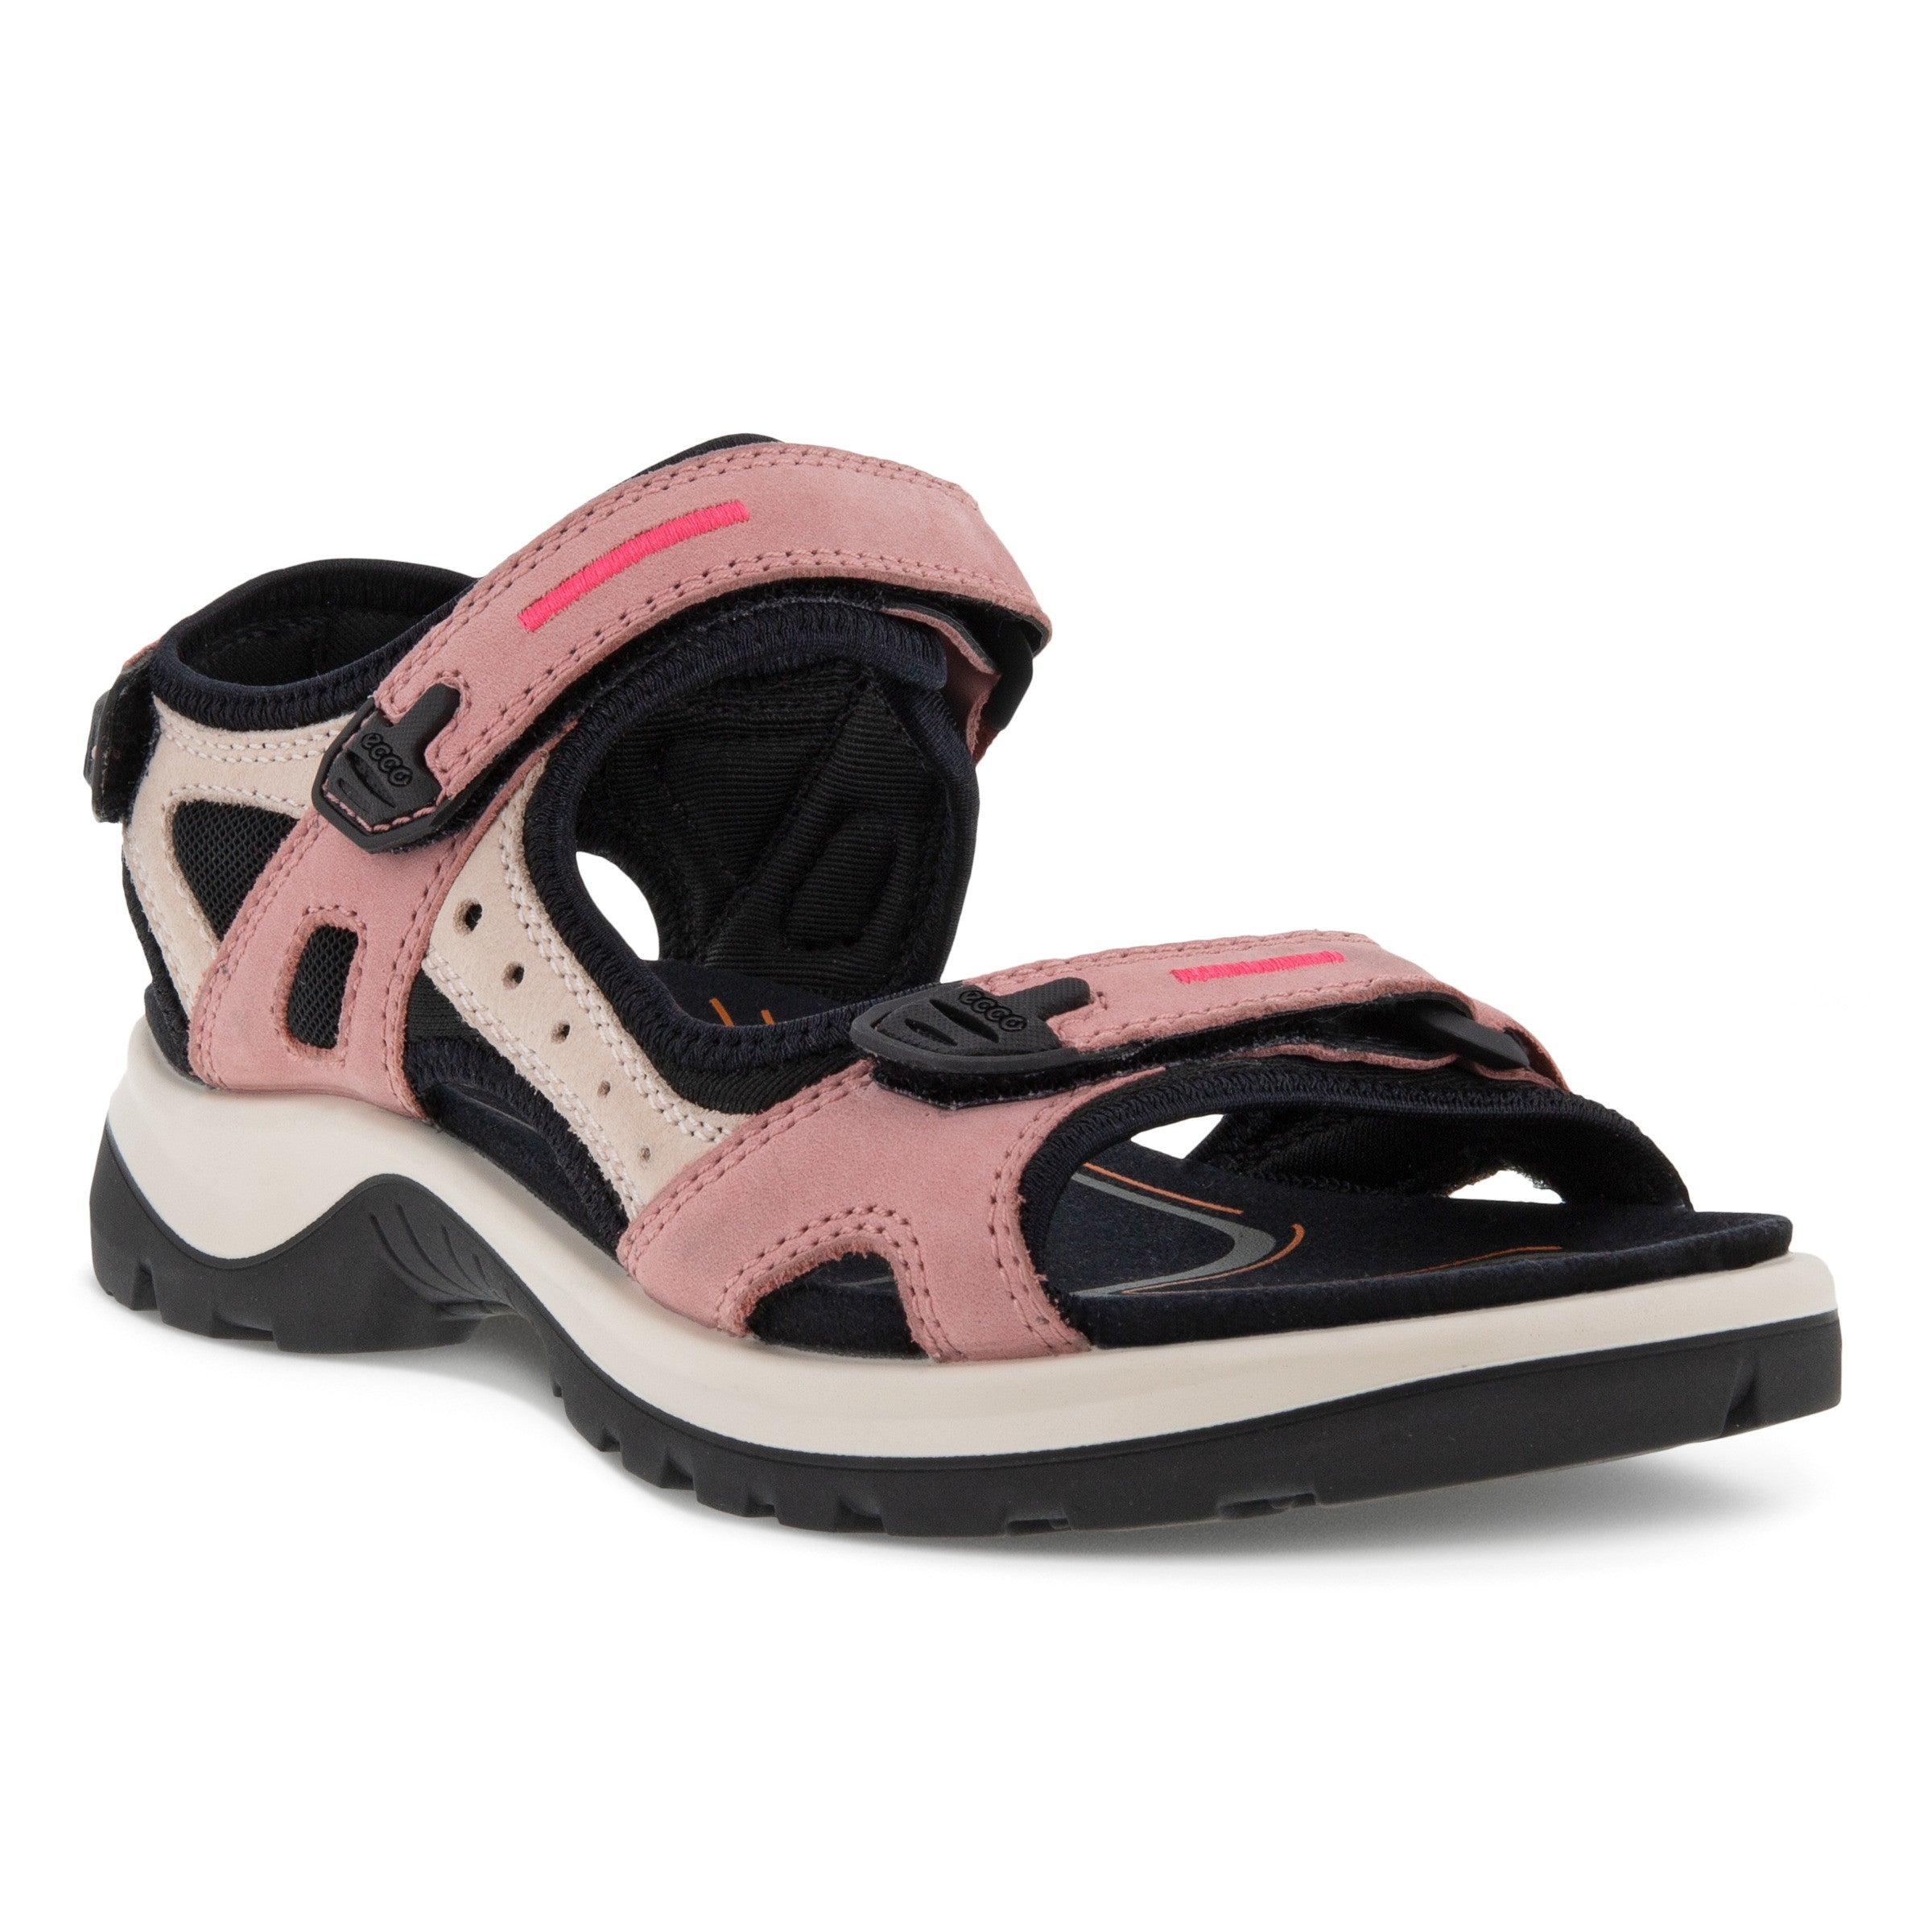 Ecco Offroad Yucatan 069563 52437 Ladies Damask Rose Pink Nubuck Arch Support Touch Fastening Sandals